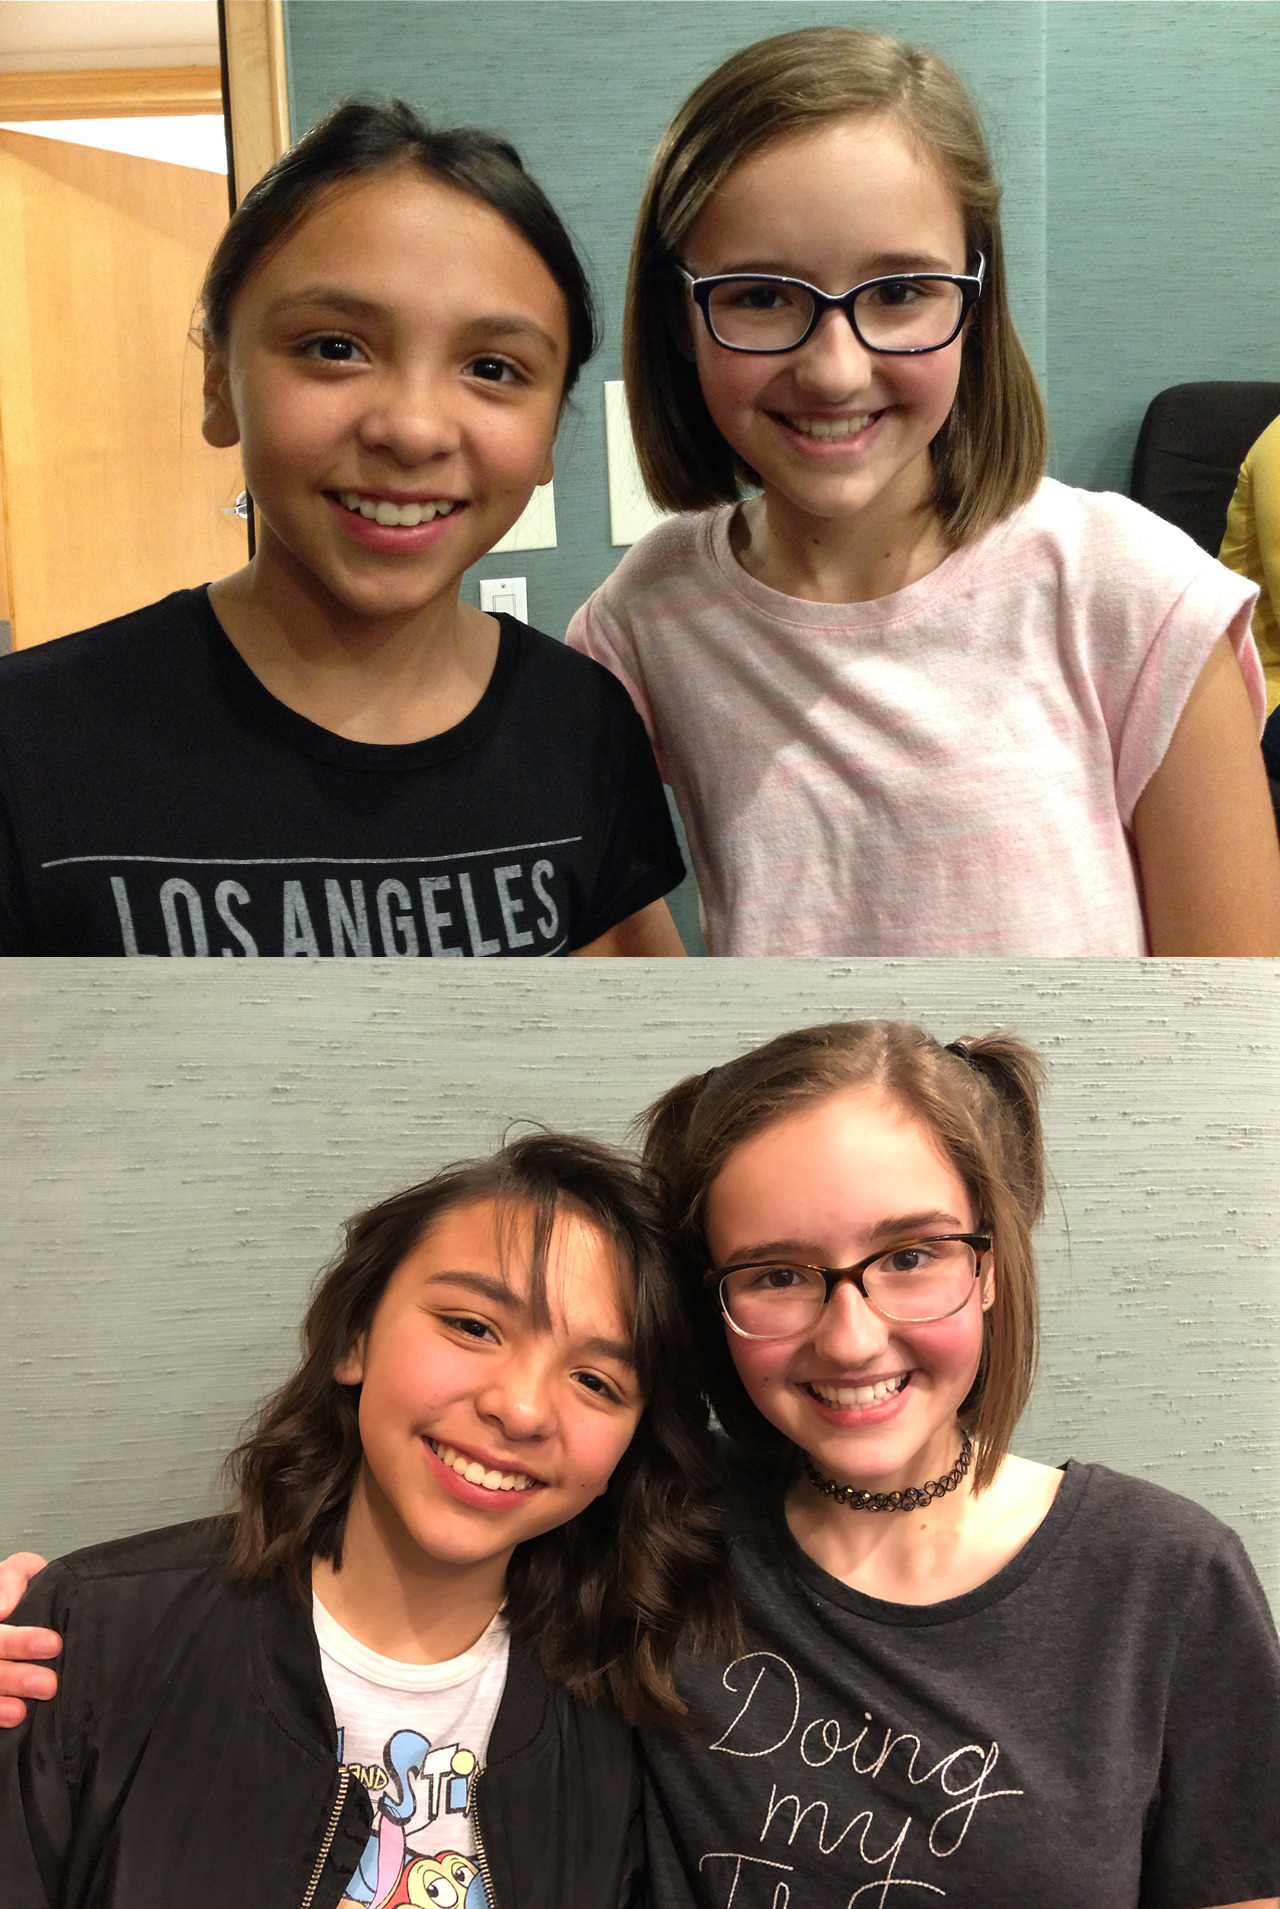 16-month challenge with the Costume Quest gals, Allie Urrutia and Gabi Graves, September 2017…